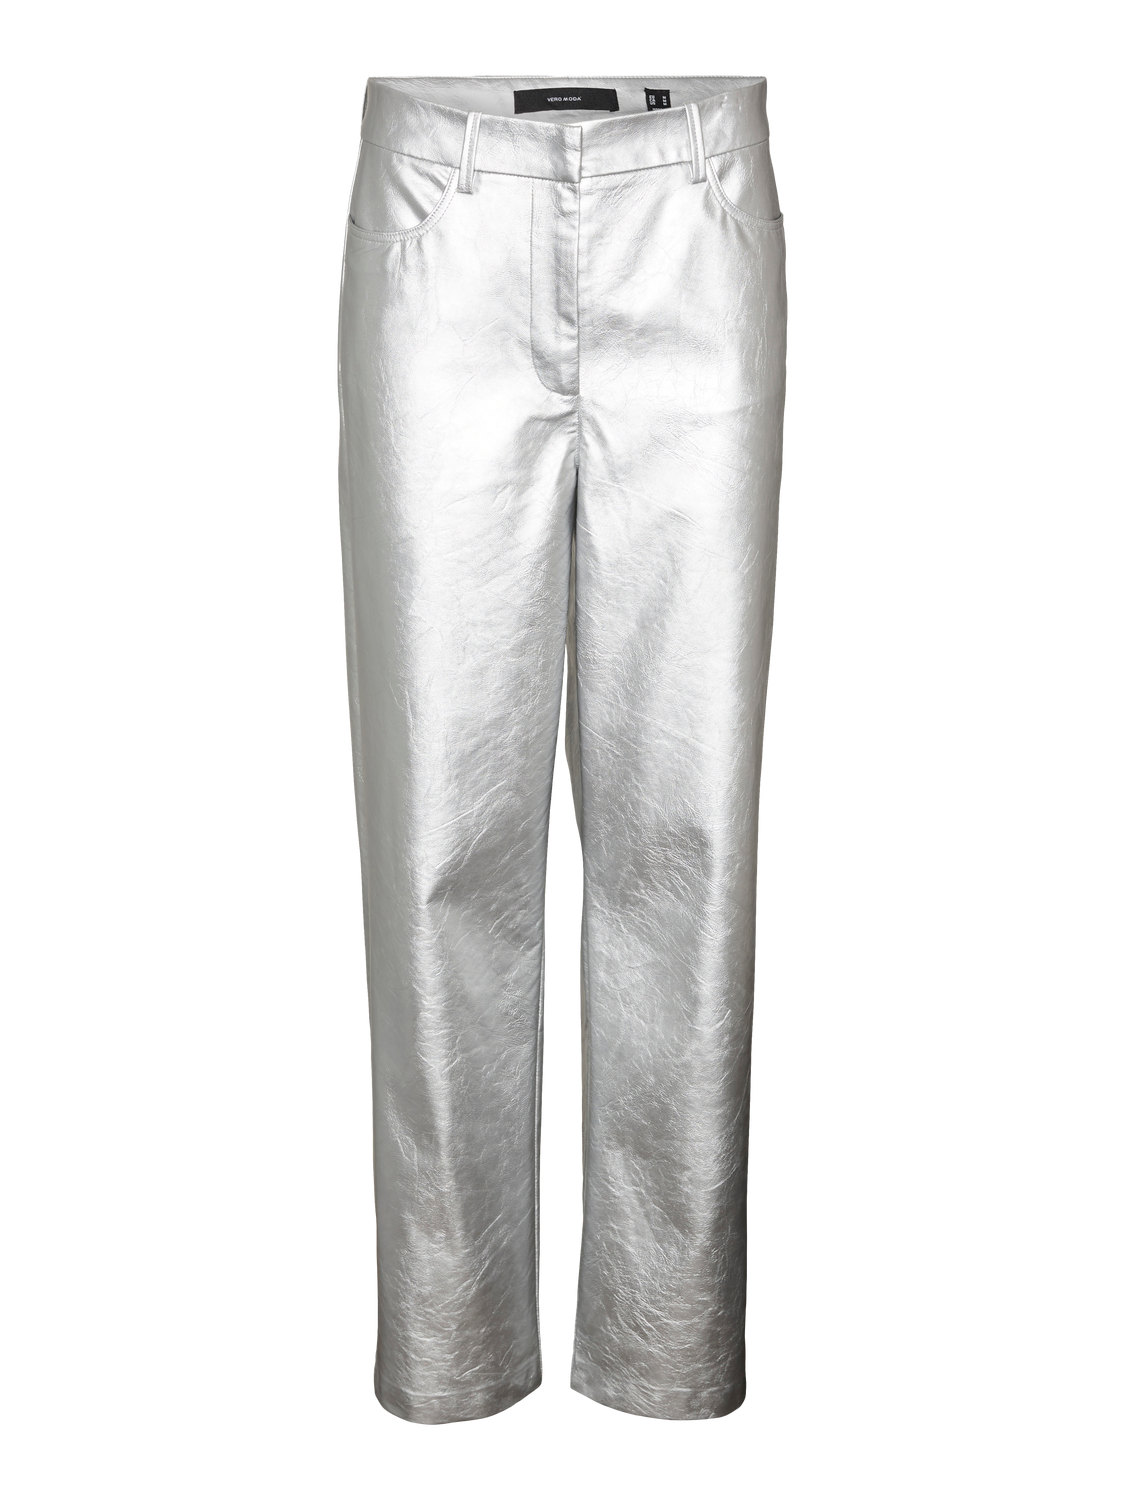 VMCIC Pants - Silver